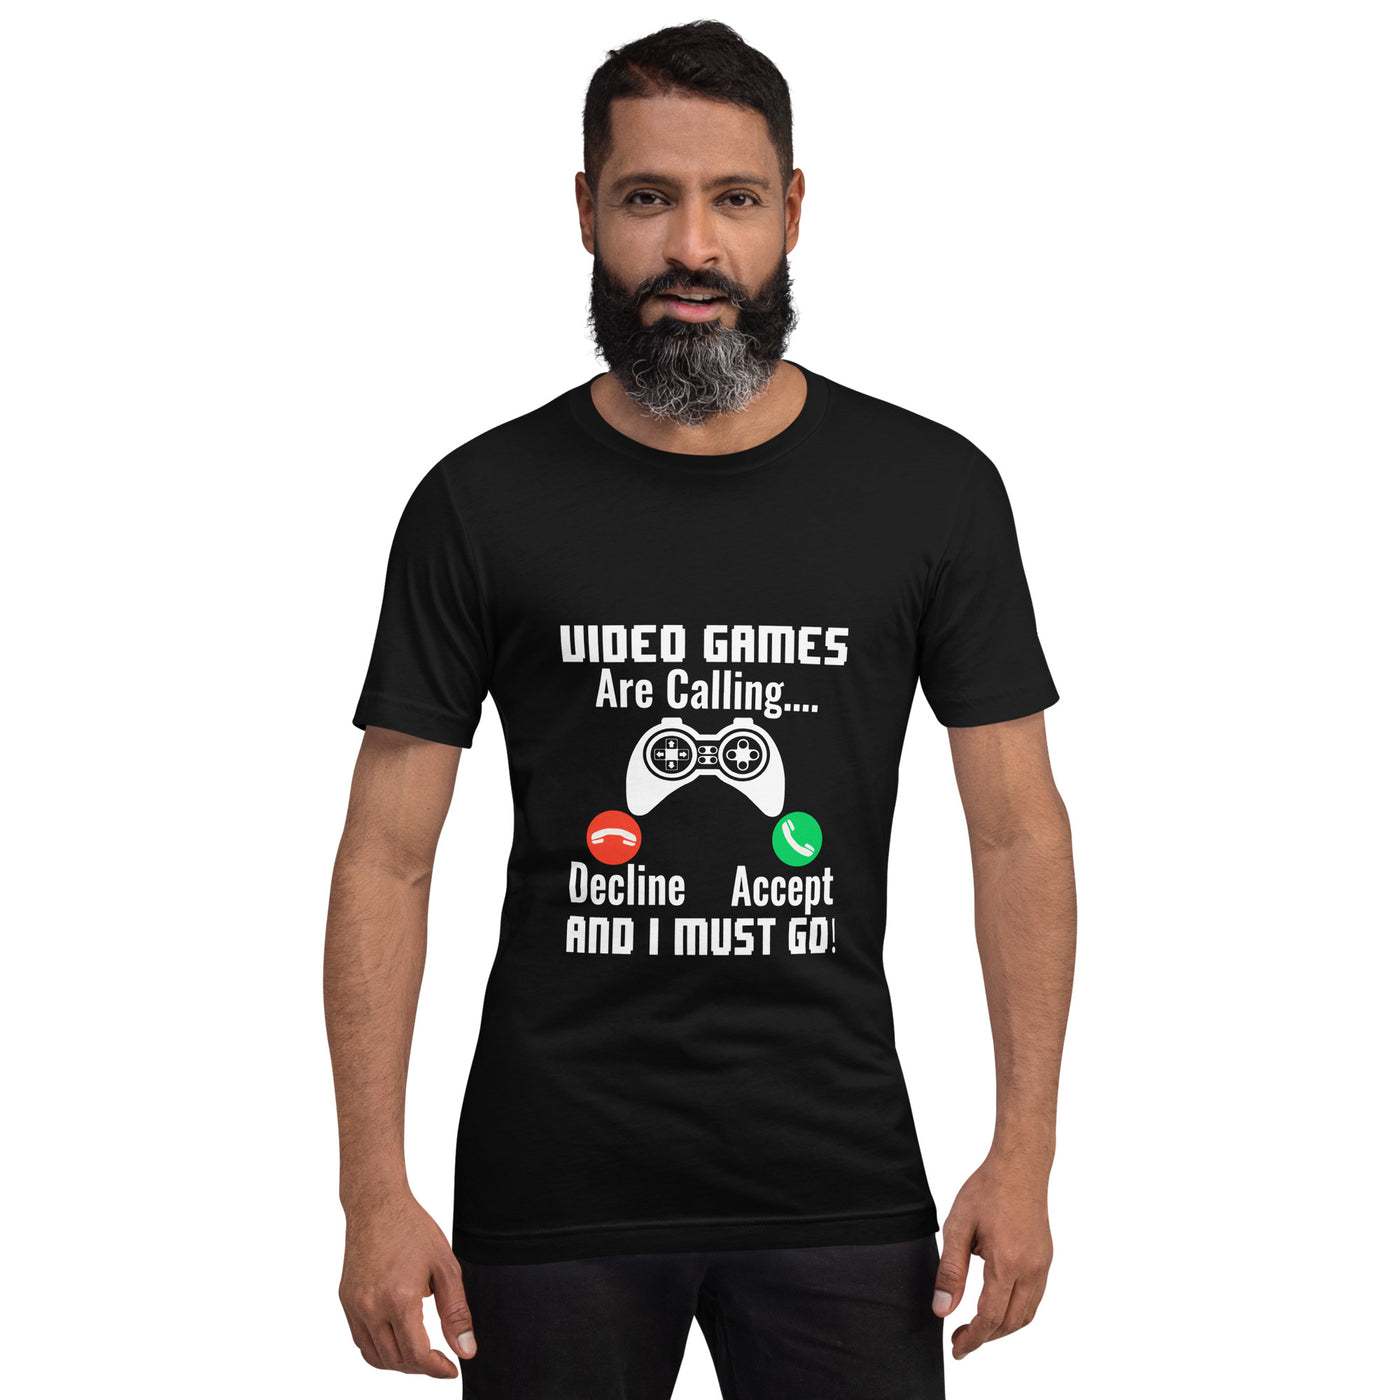 Video Games are Calling and I must Go Rima 18 - Unisex t-shirt